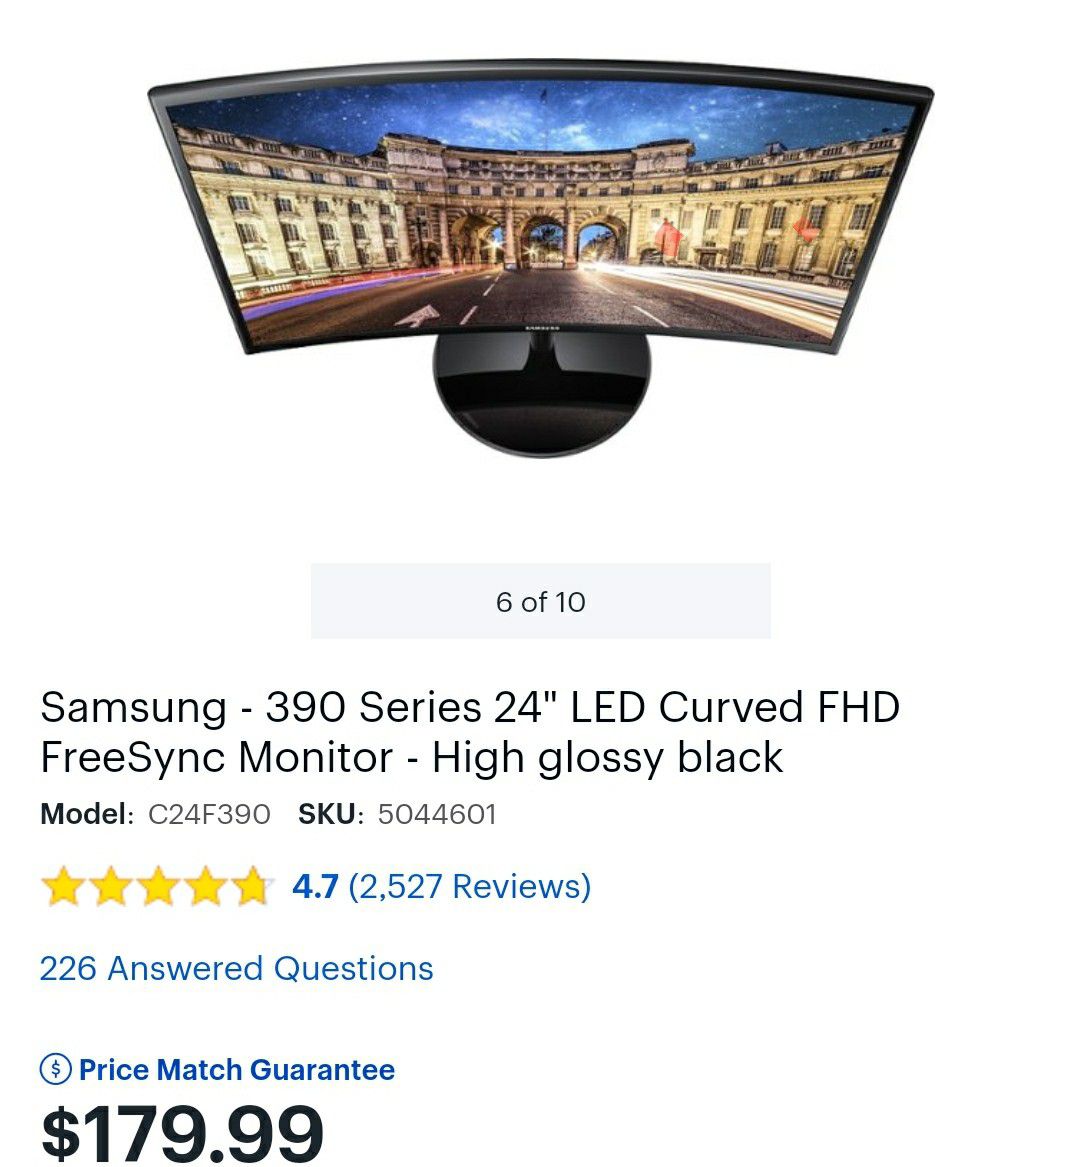 24 in curved FHD Samsung LED Monitor